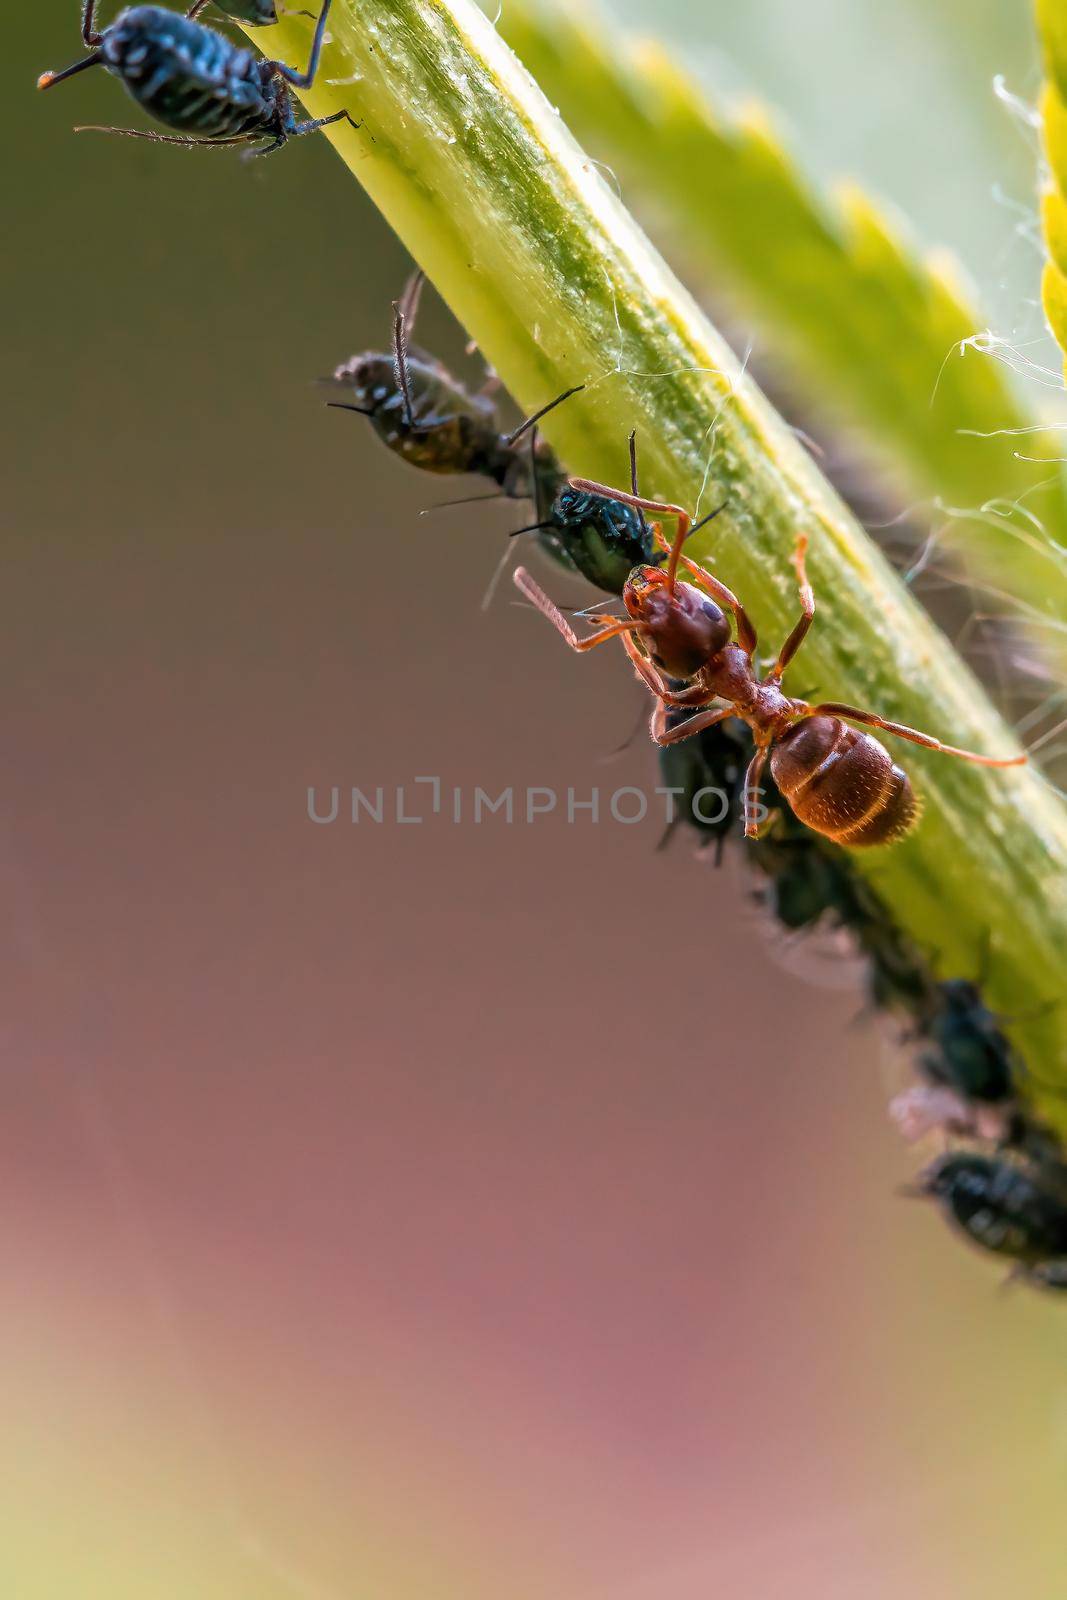 a ant breeds aphids for its honeydew